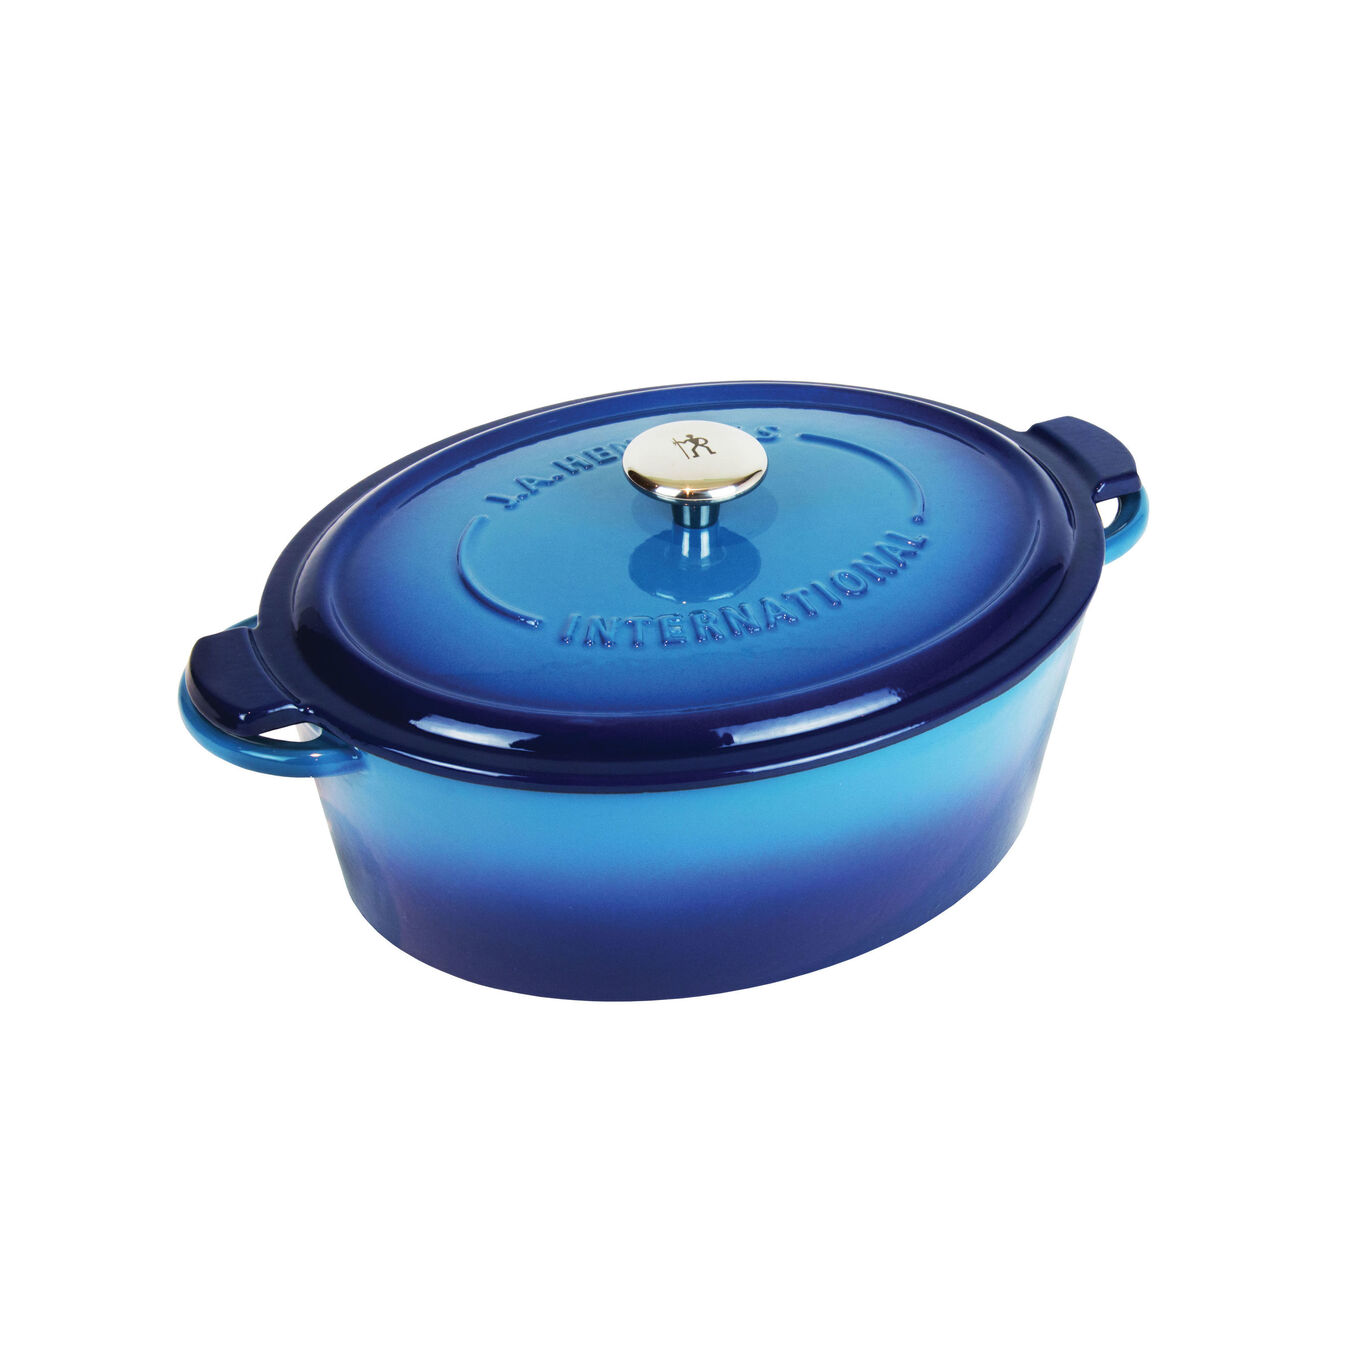 4.4 l cast iron oval French oven, blue,,large 1